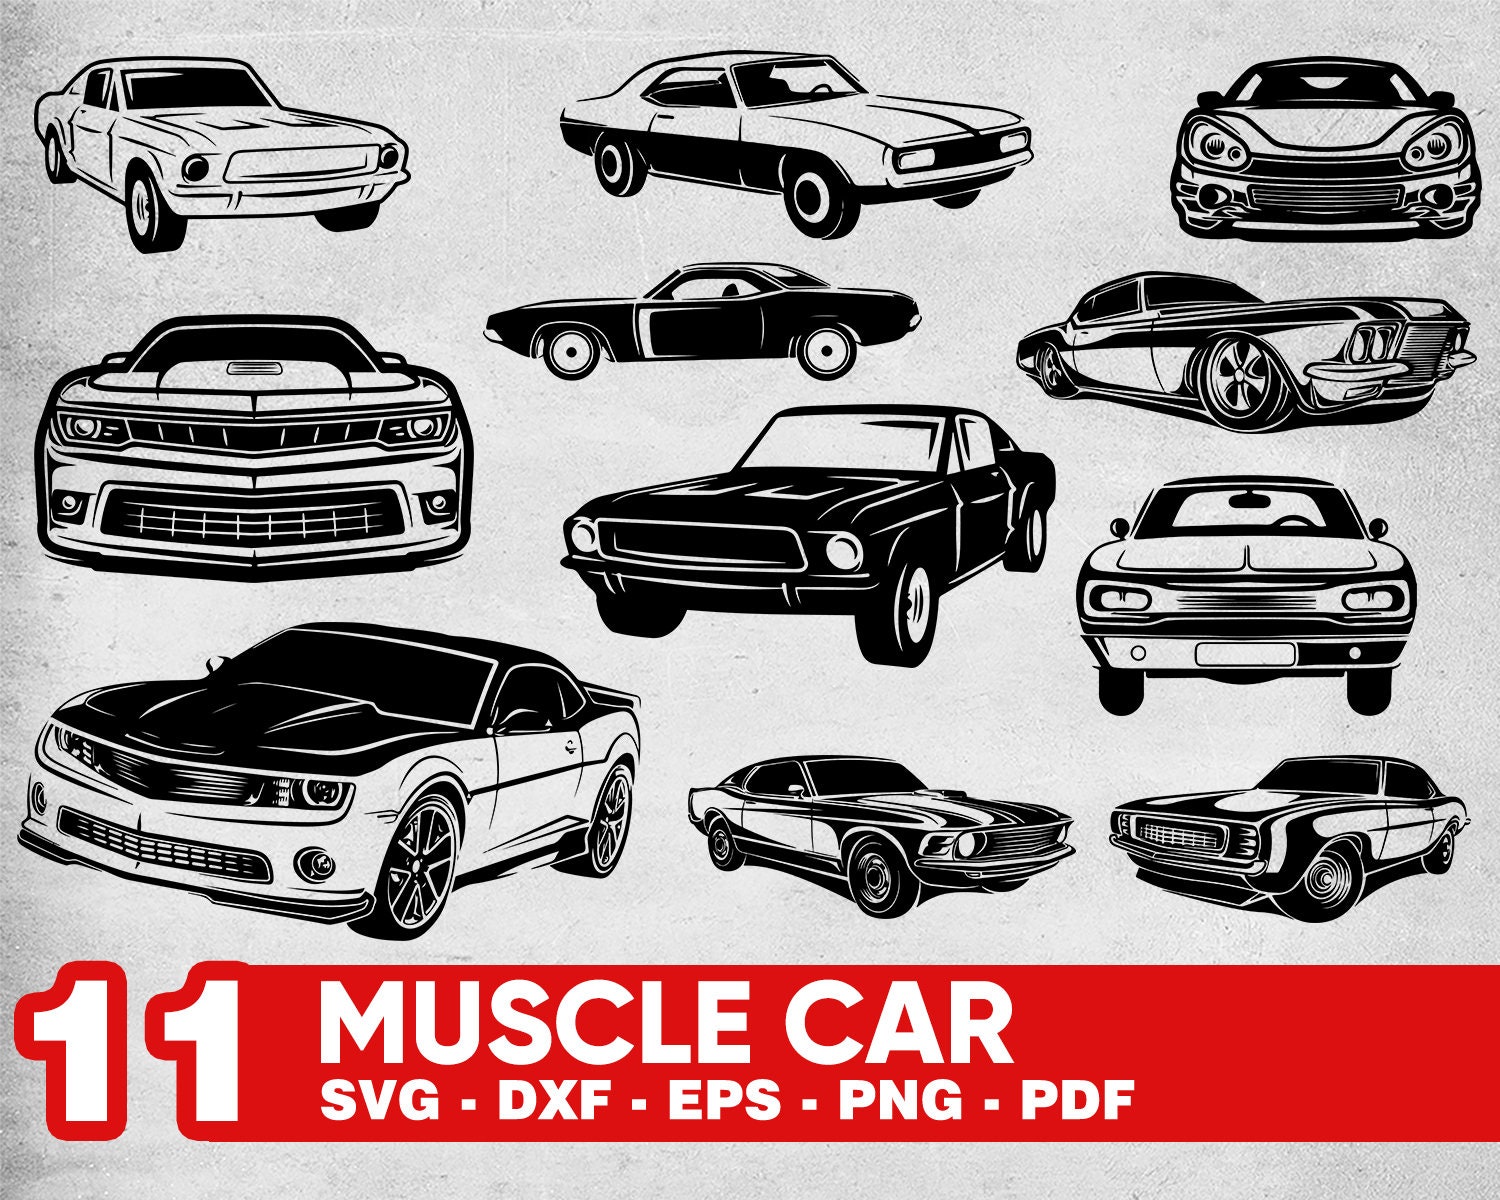 Download MUSCLE CAR SVG Camaro svg chevy lovers svg car vector | Etsy